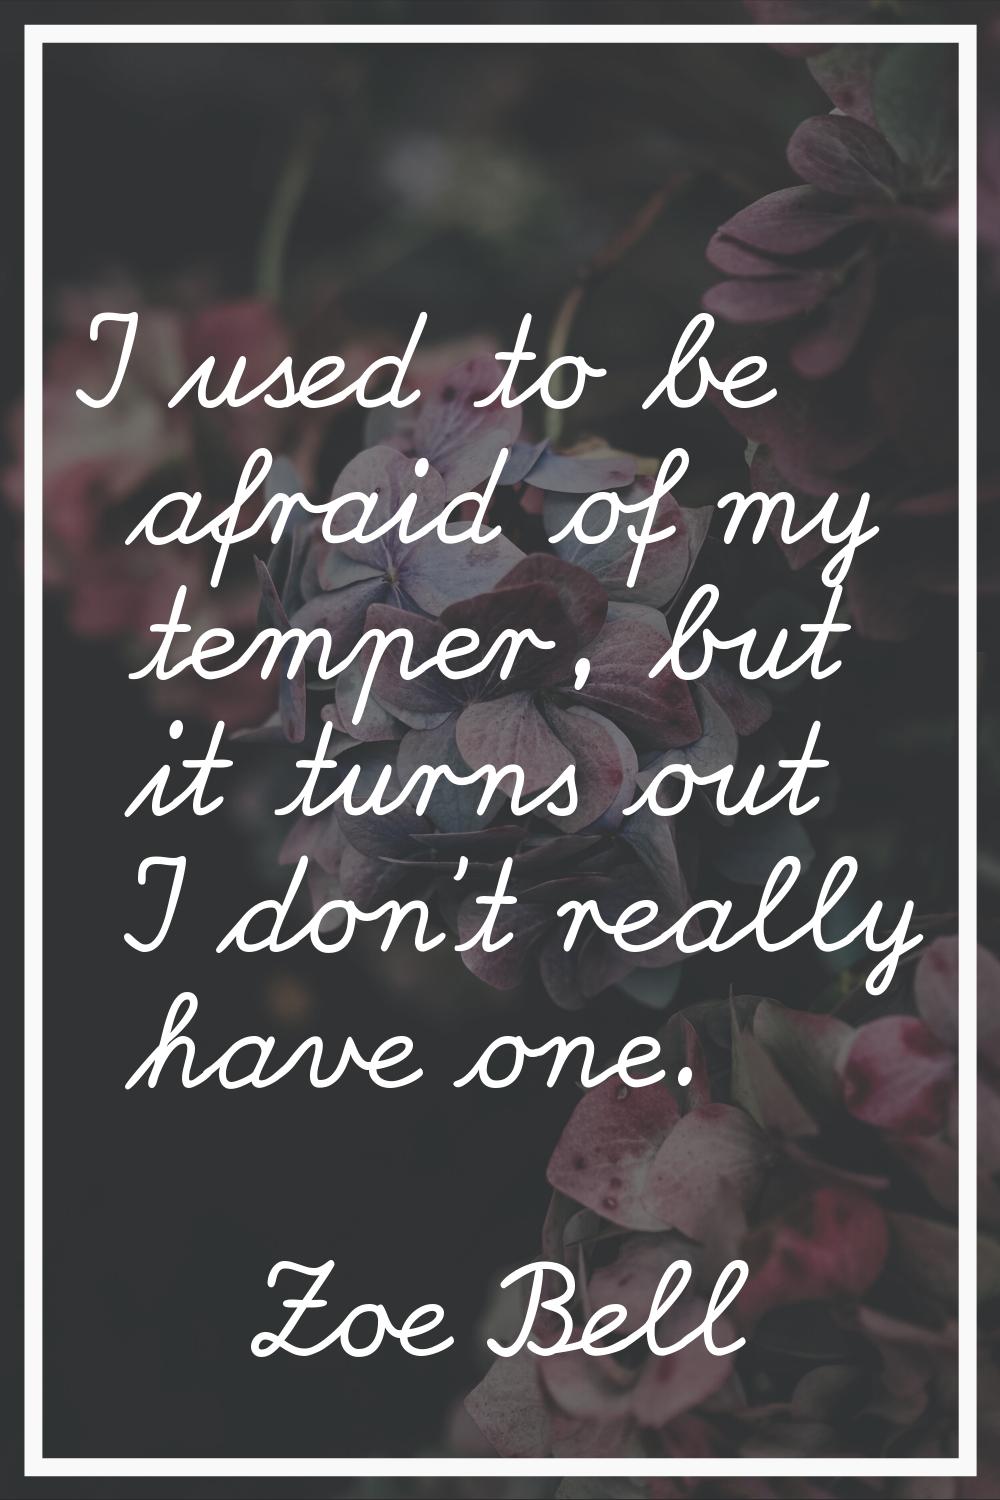 I used to be afraid of my temper, but it turns out I don't really have one.